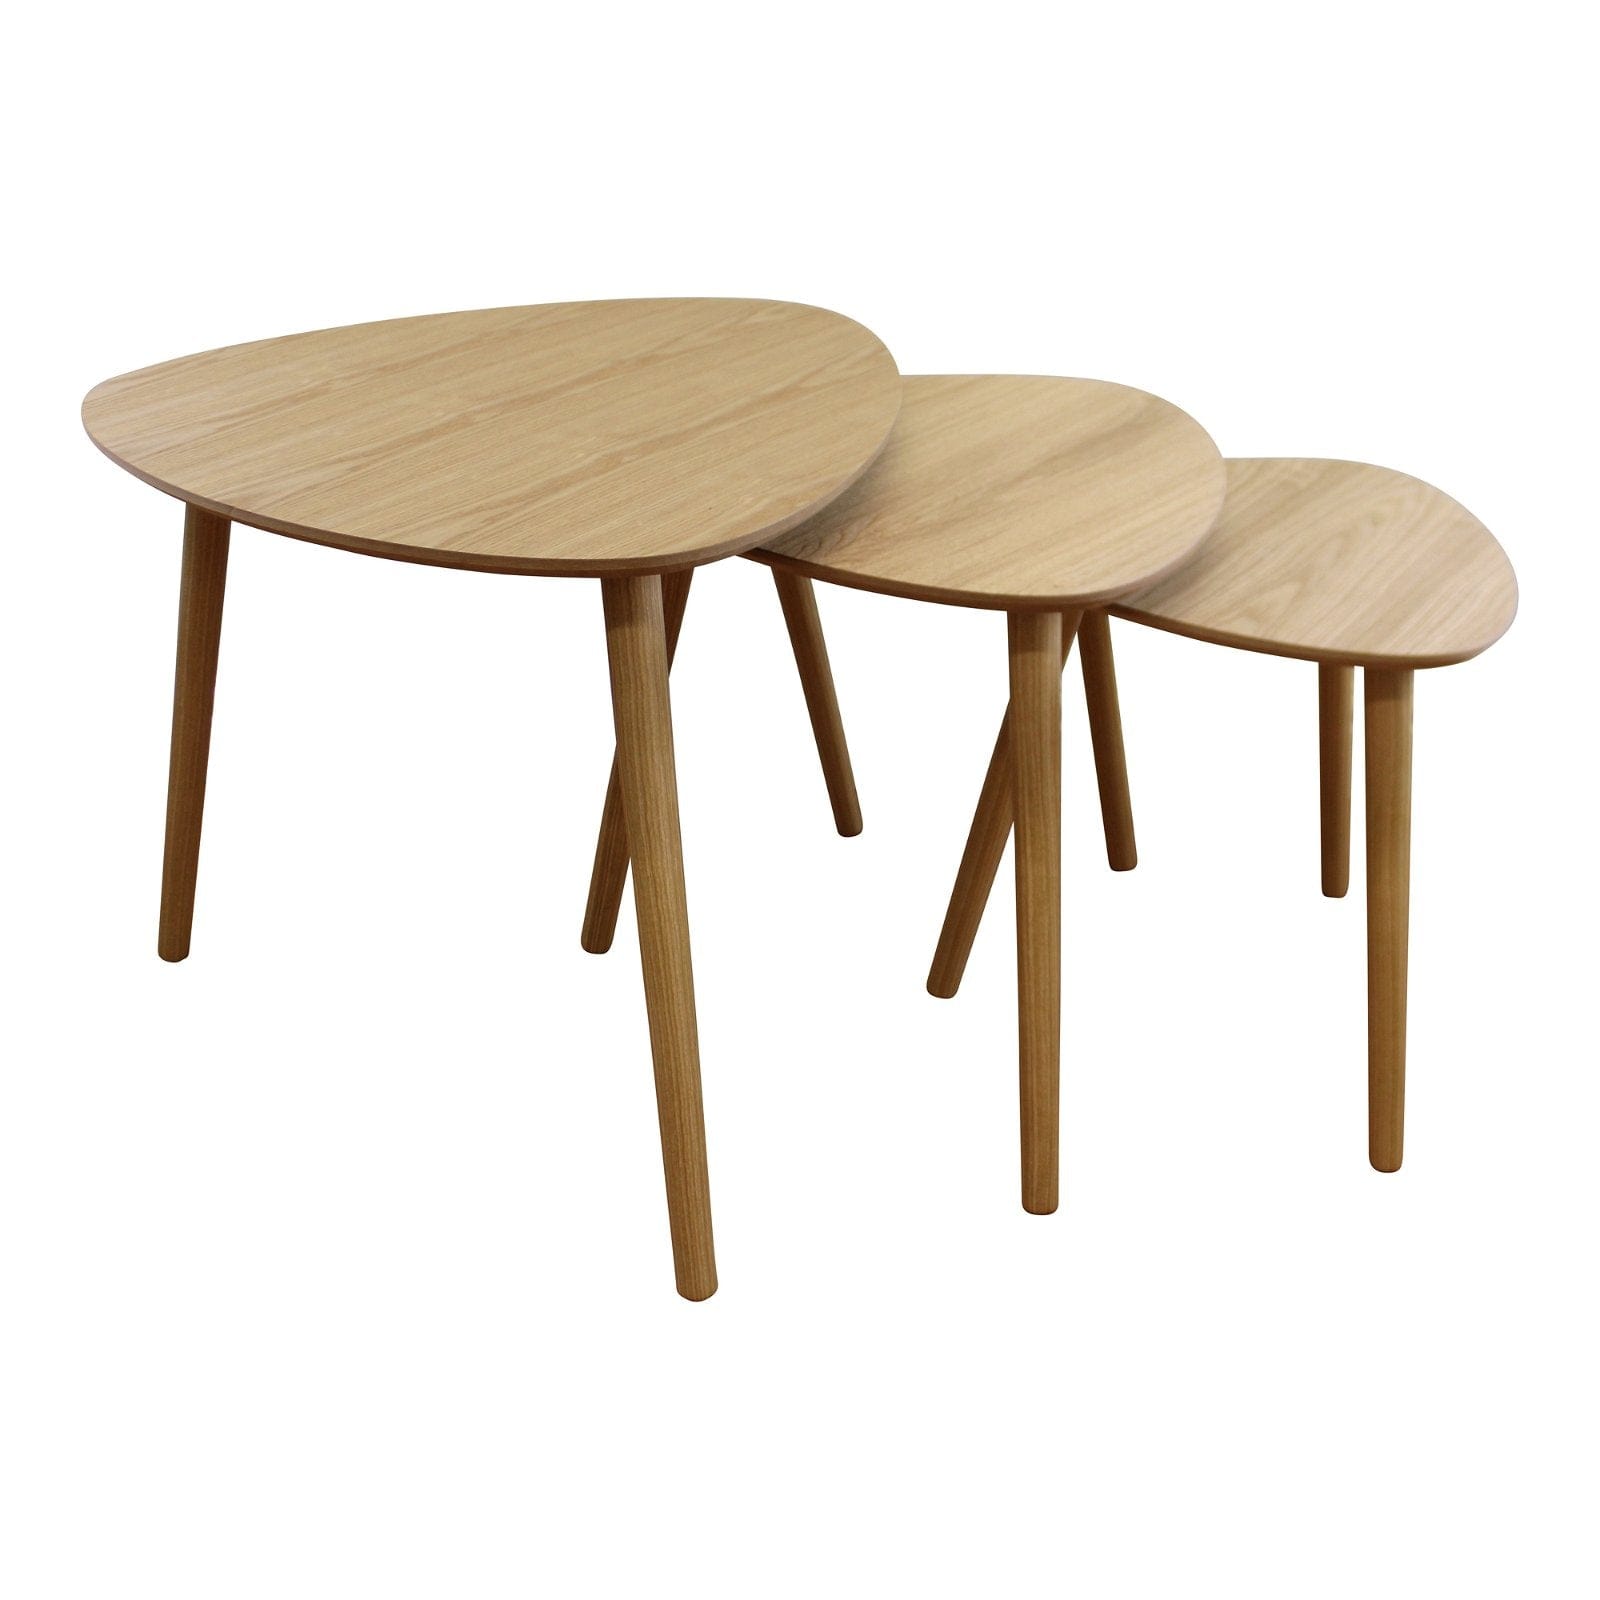 Set of 3 Oval Nest Of Tables, Wooden Finish - Kaftan direct